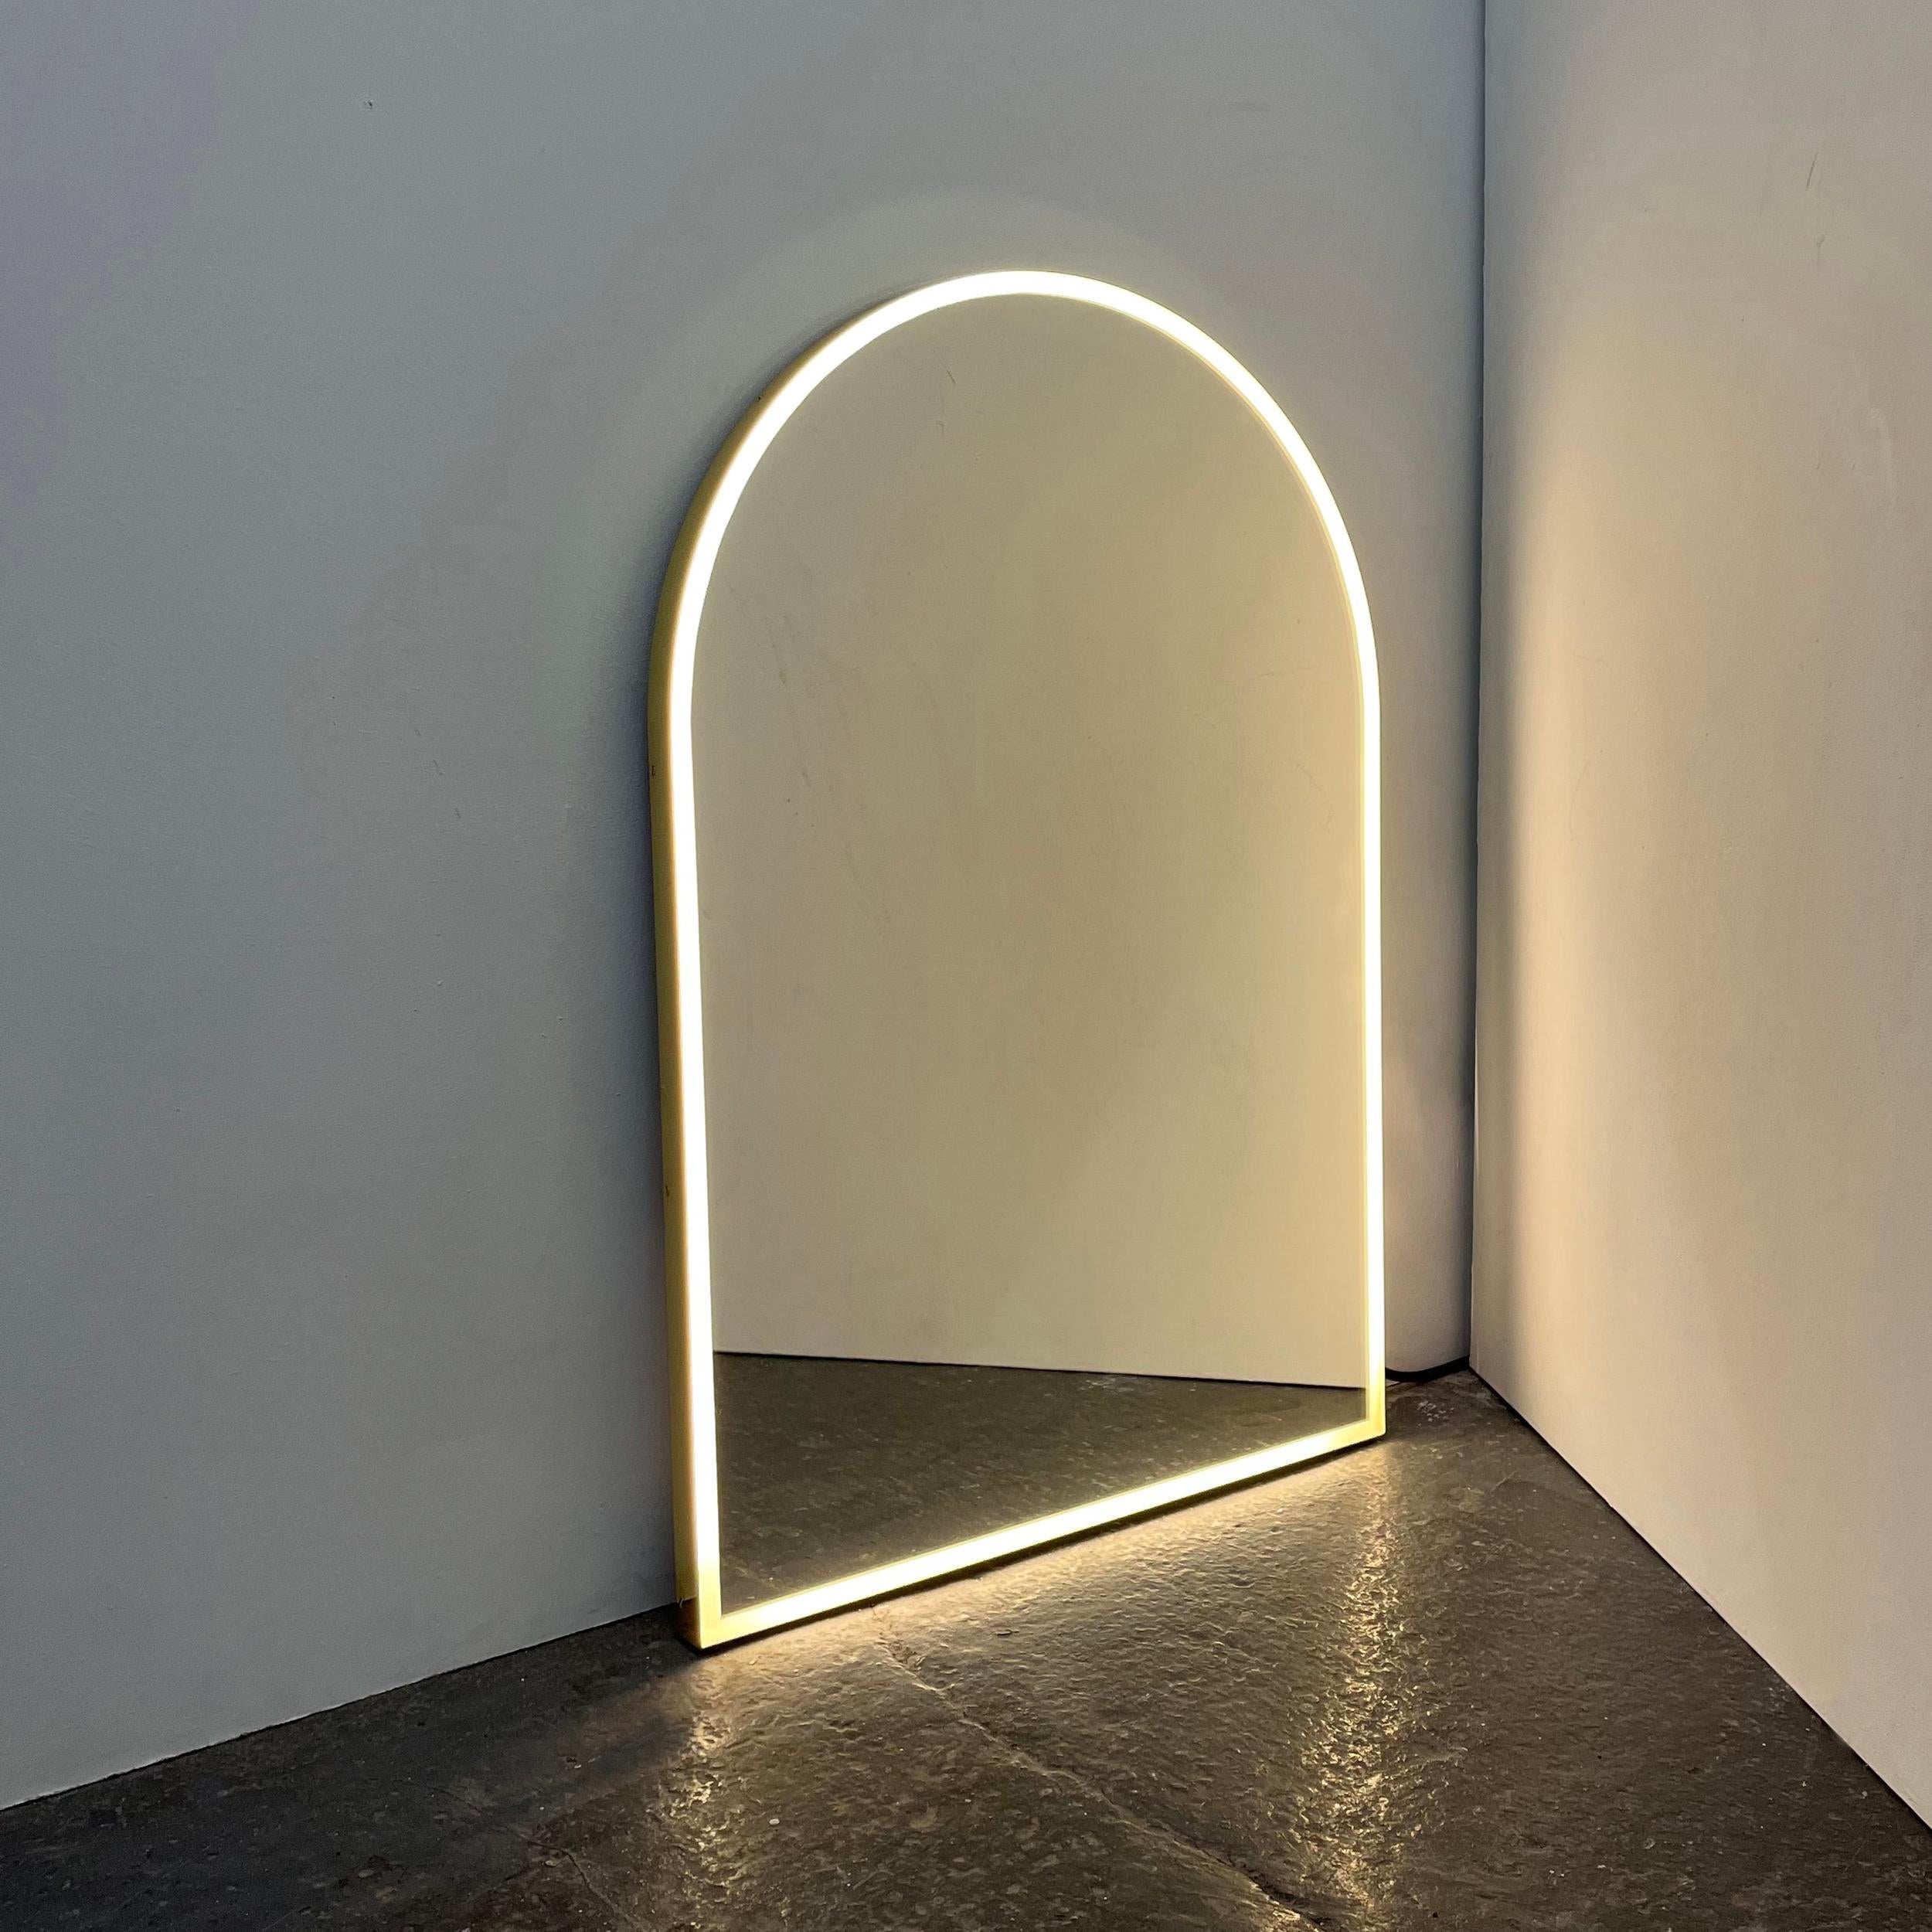 Contemporary handcrafted front illuminated large arched mirror with a polished brass frame. Designed and handcrafted in London, UK.

Medium, large and extra-large (37cm x 56cm, 46cm x 71cm and 48cm x 97cm) mirrors are fitted with an ingenious French